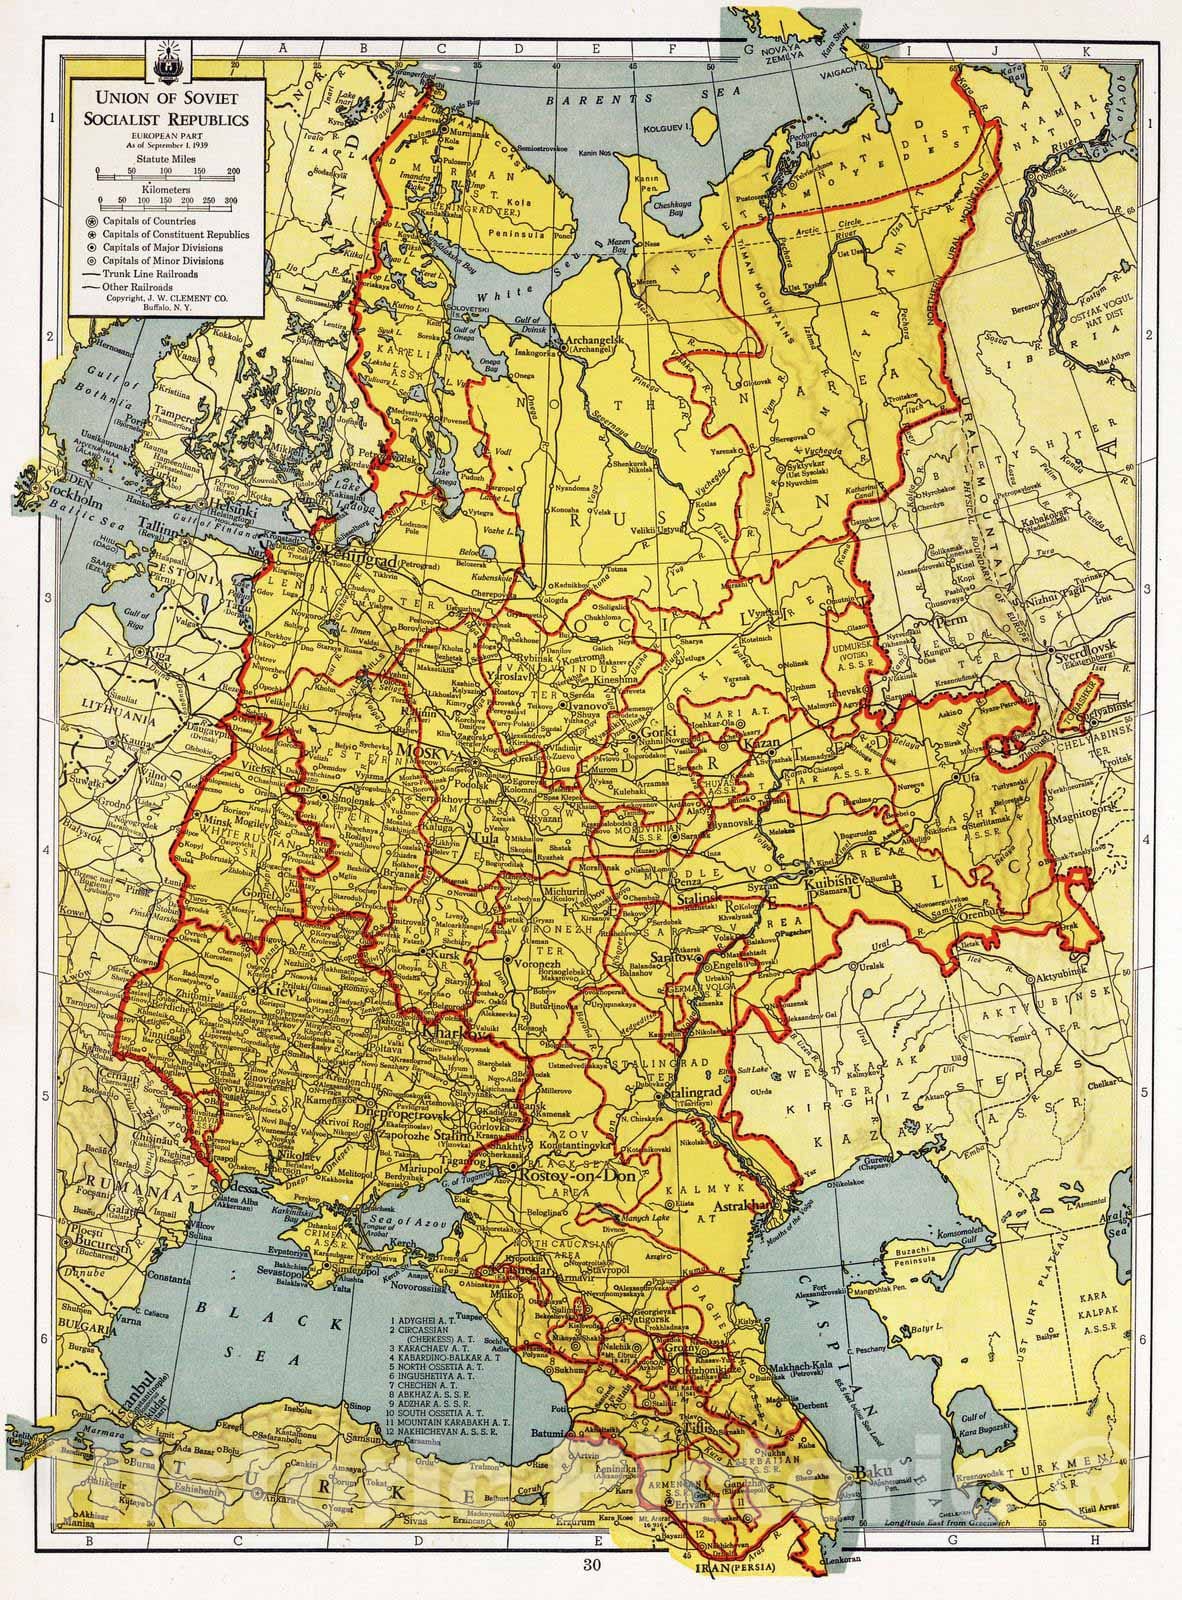 Historic Map : 1943 Union of Soviet Socialist Repubic, As of September 1, 1939 - Vintage Wall Art